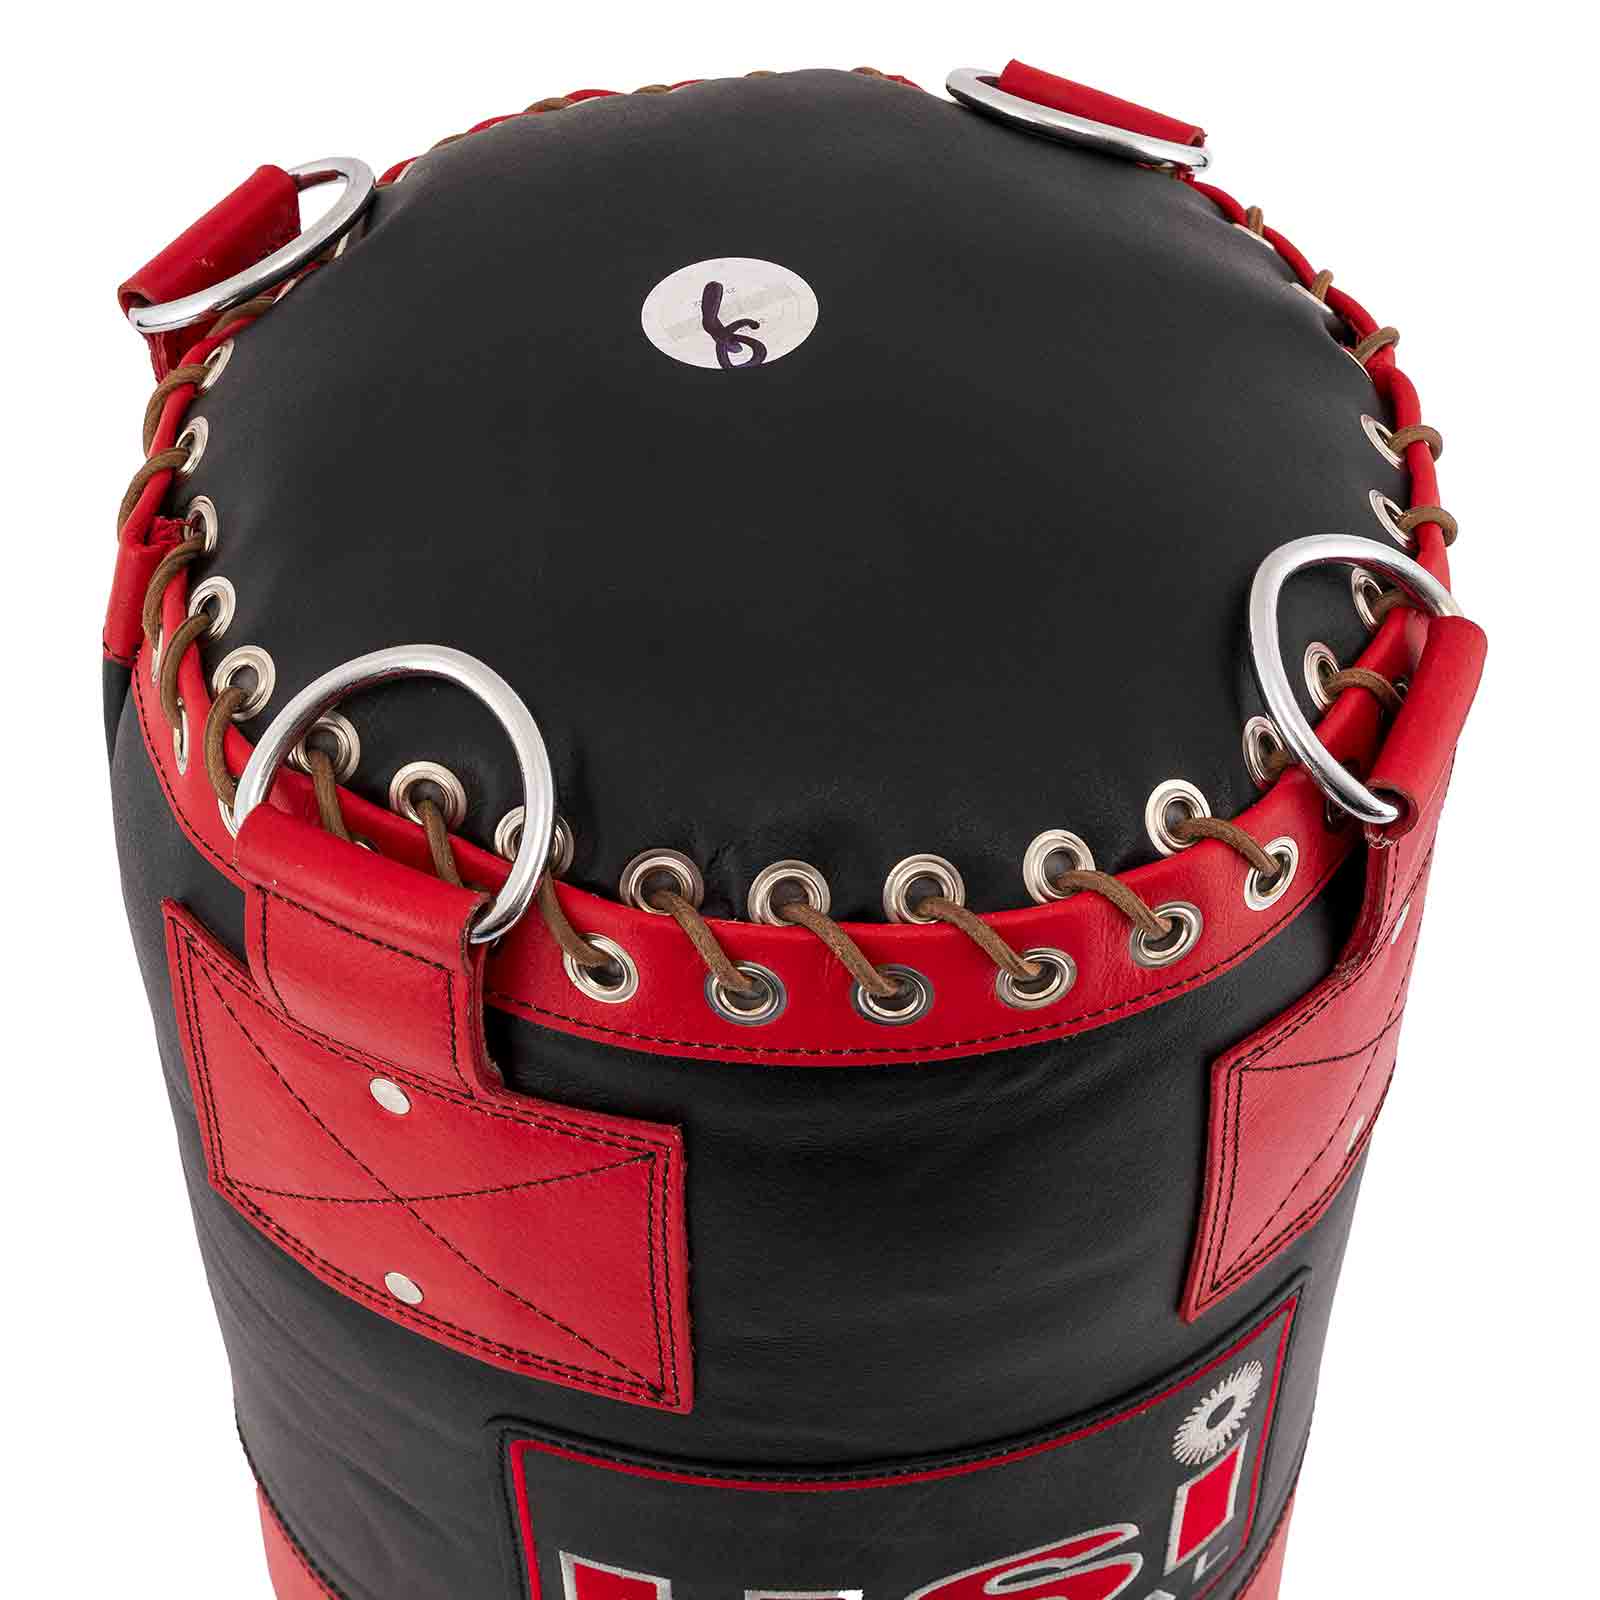 USI LEATHER 4 FOOT BOXING BAG